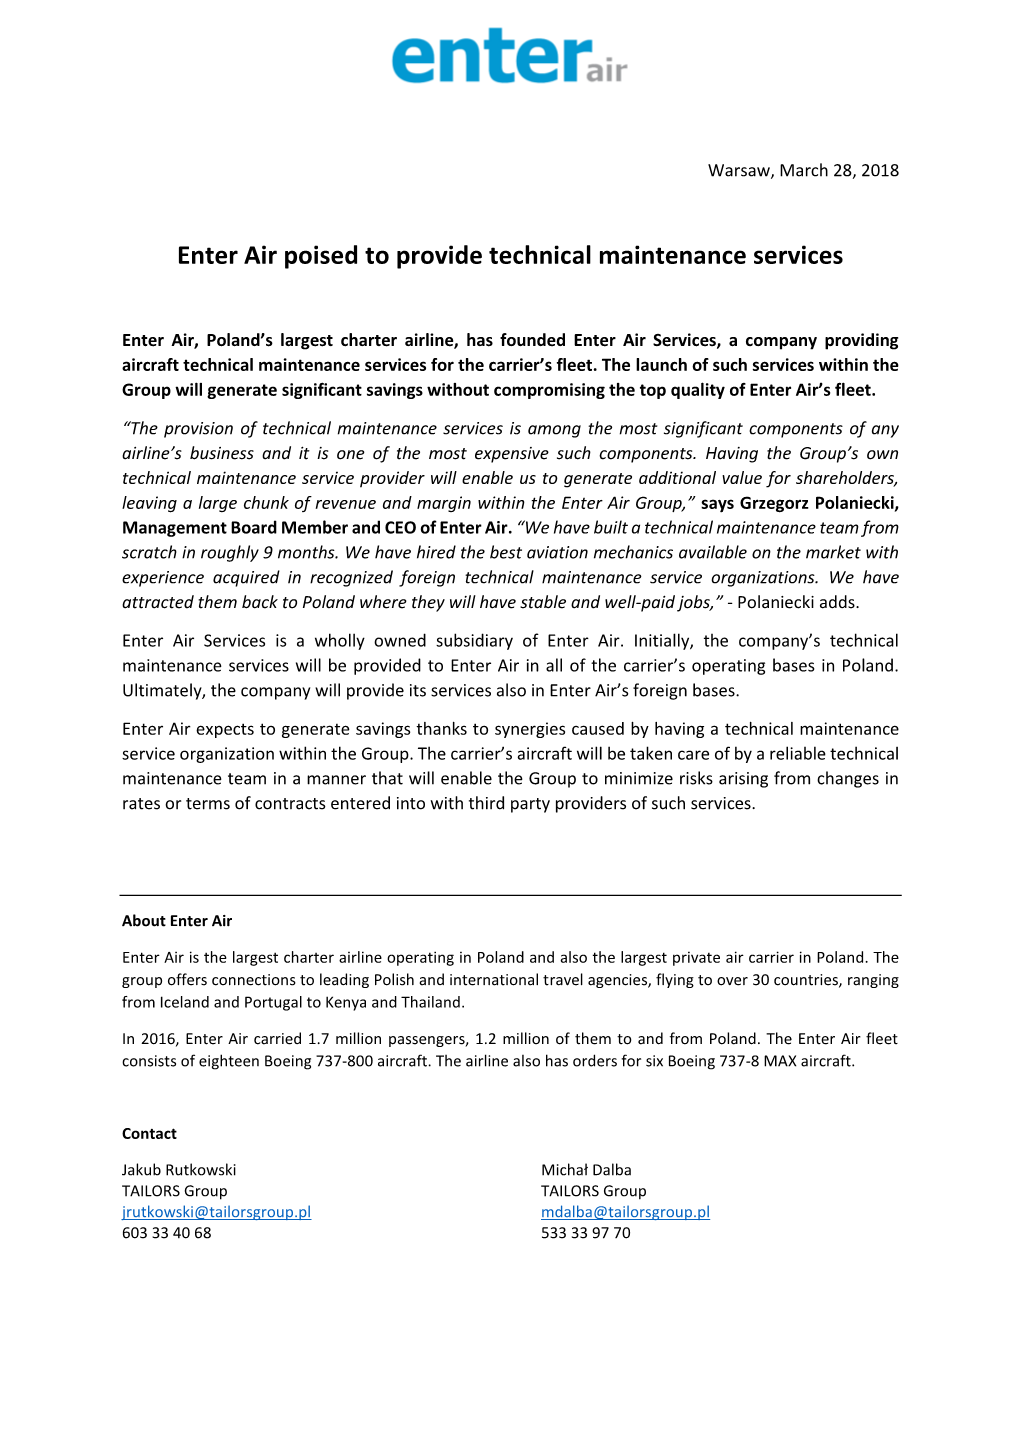 Enter Air Poised to Provide Technical Maintenance Services